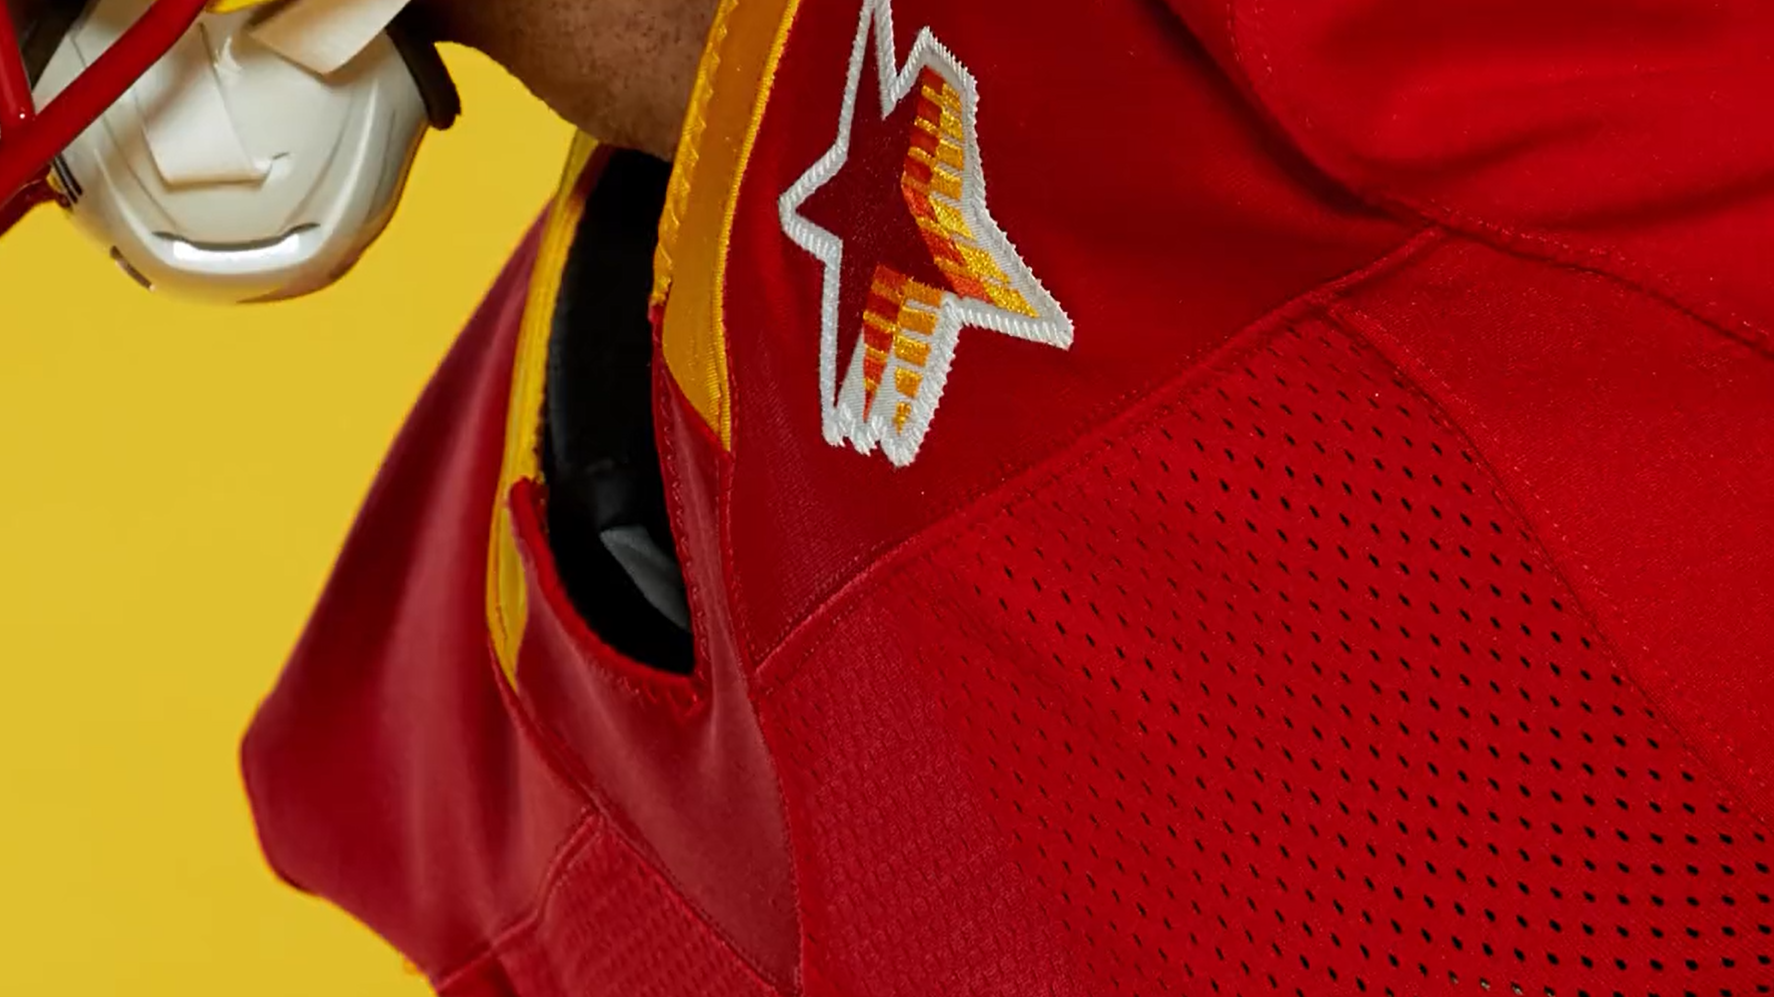 USFL uniforms revealed: Here are the jerseys for all eight teams